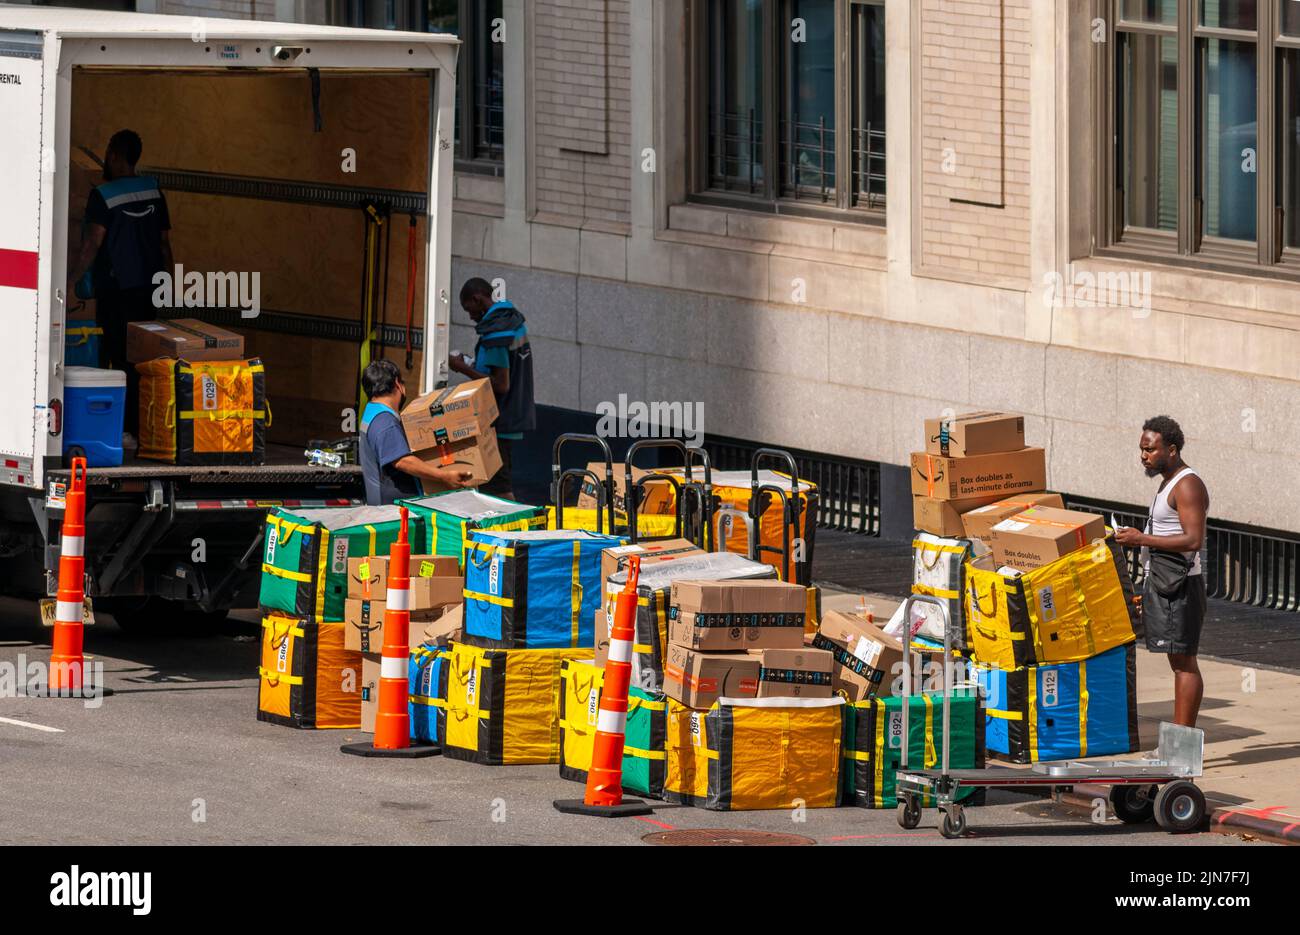 Workers prepare Amazon deliveries for distribution in the Chelsea neighborhood of New York on Tuesday, August 2, 2022. (© Richard B. Levine) Stock Photo